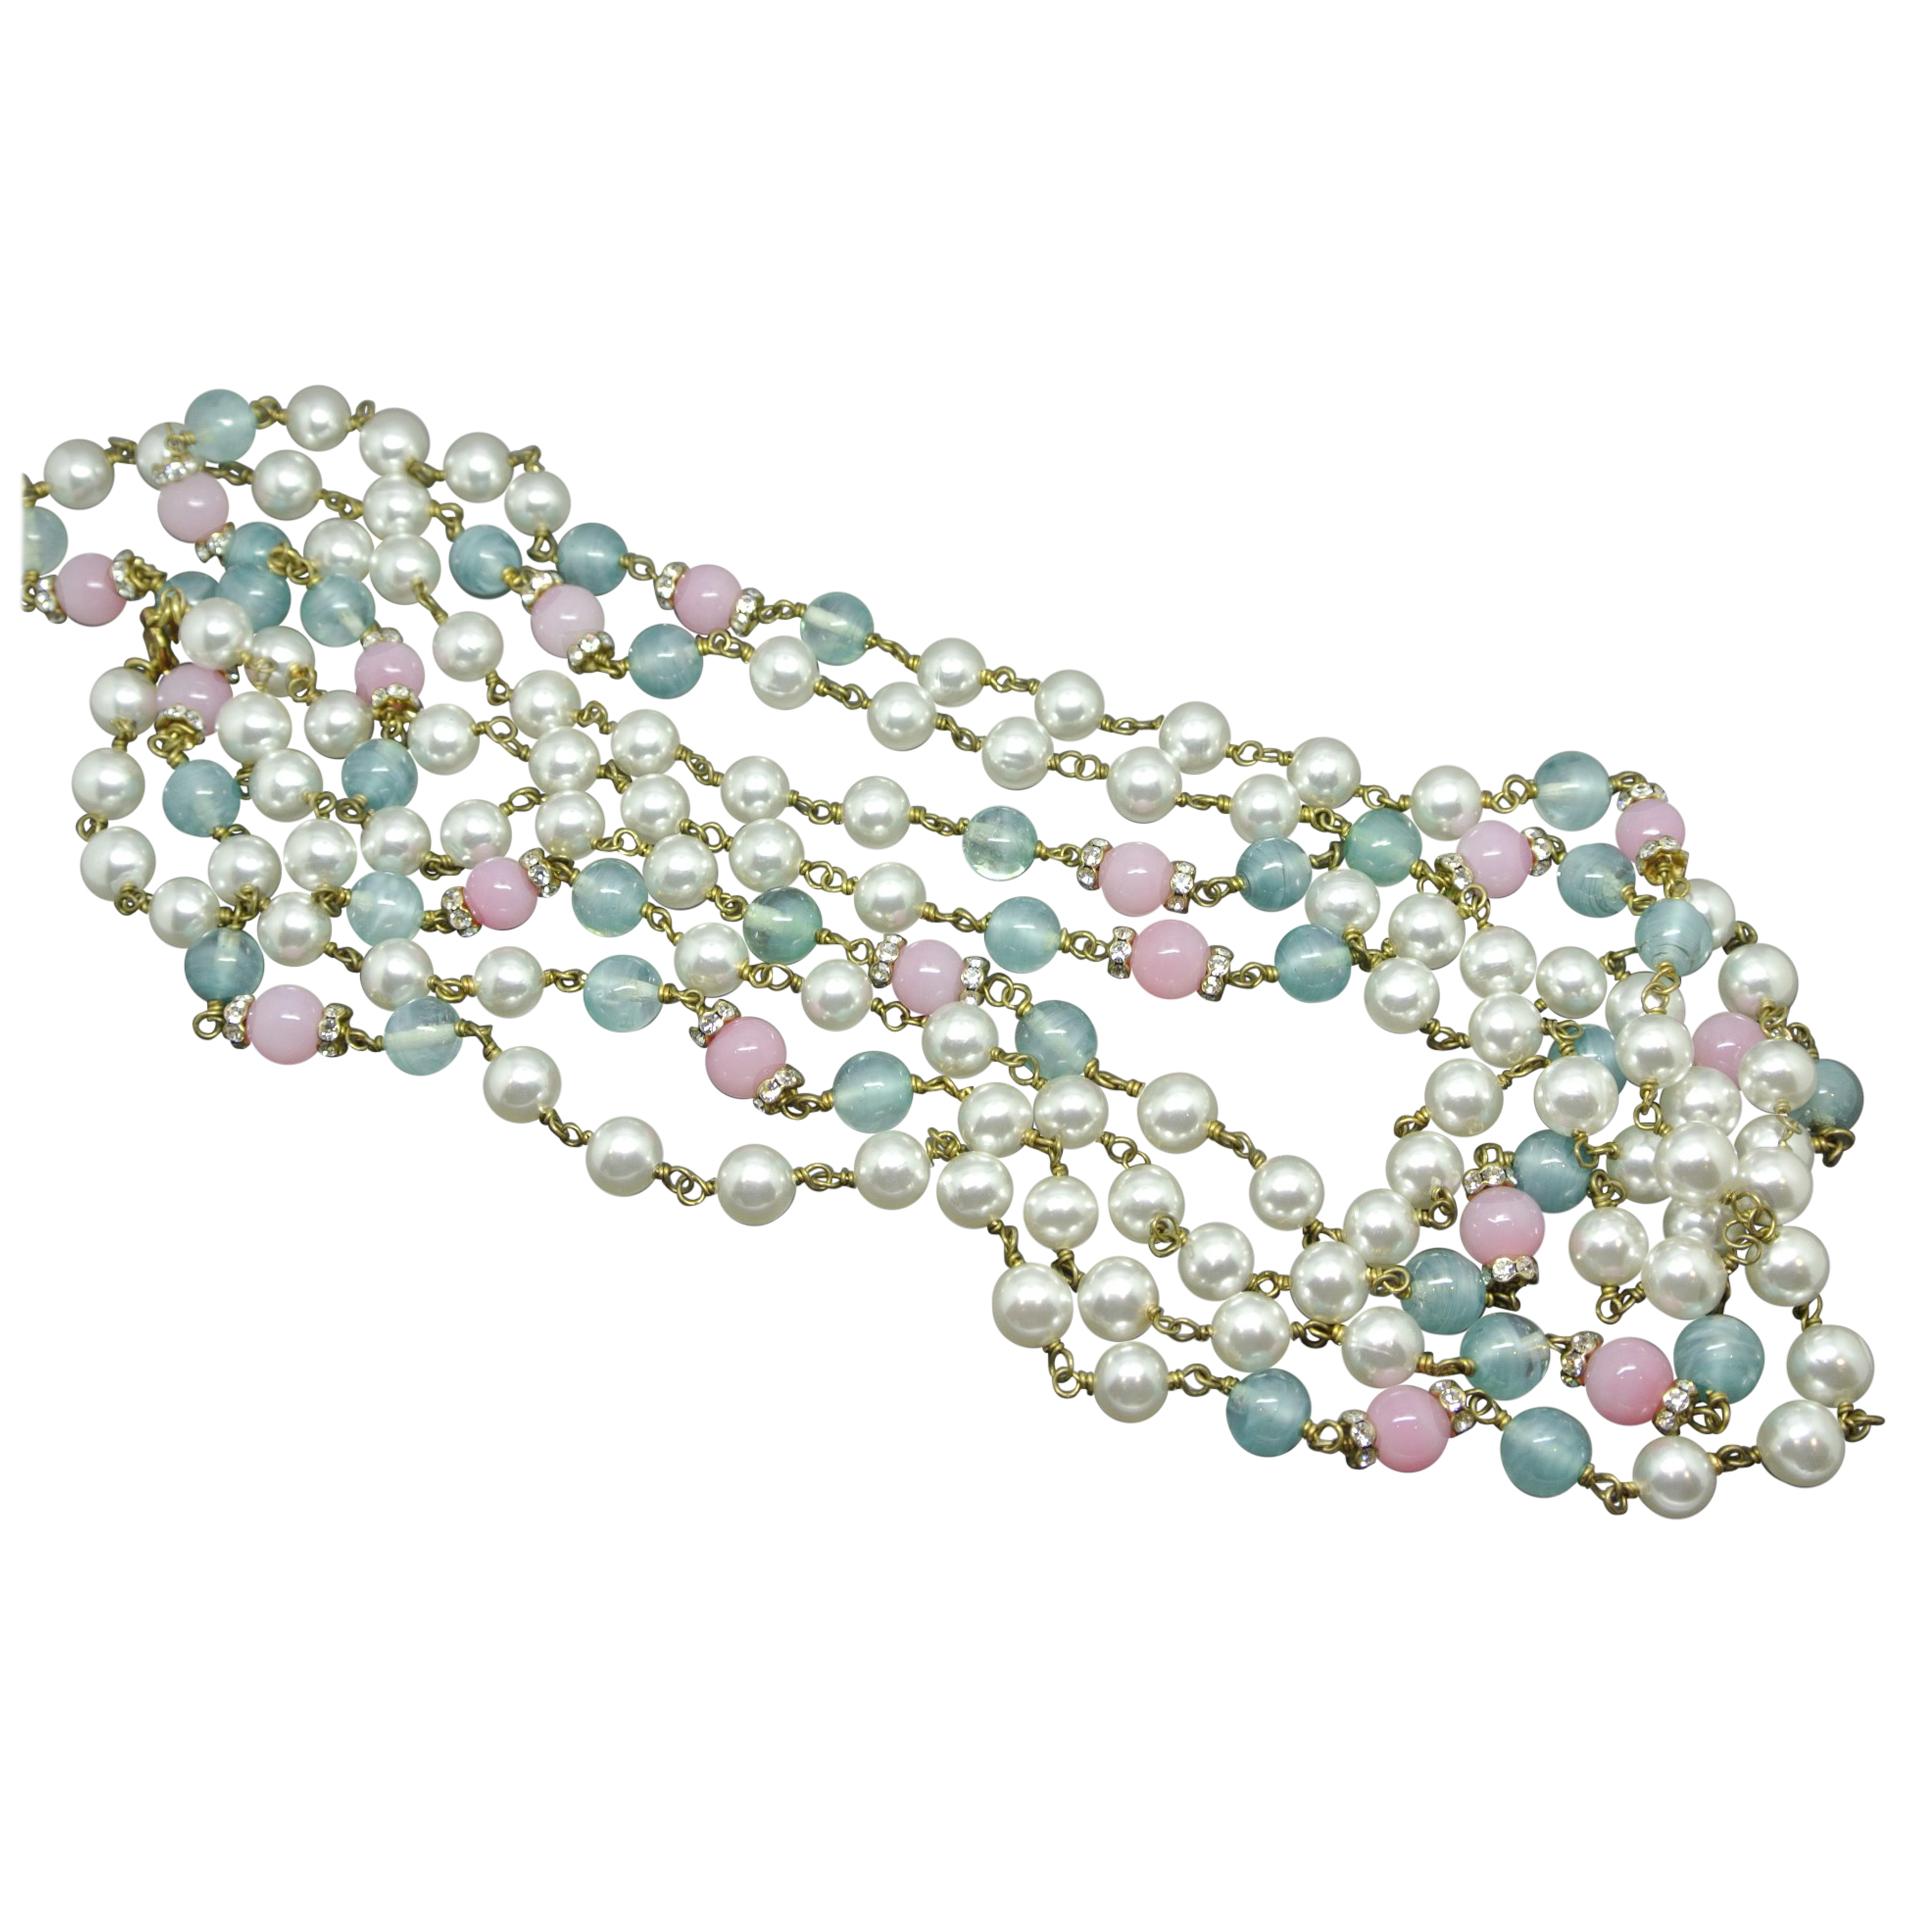 Chanel green pink gripoix poured glass faux pearl long necklace For Sale